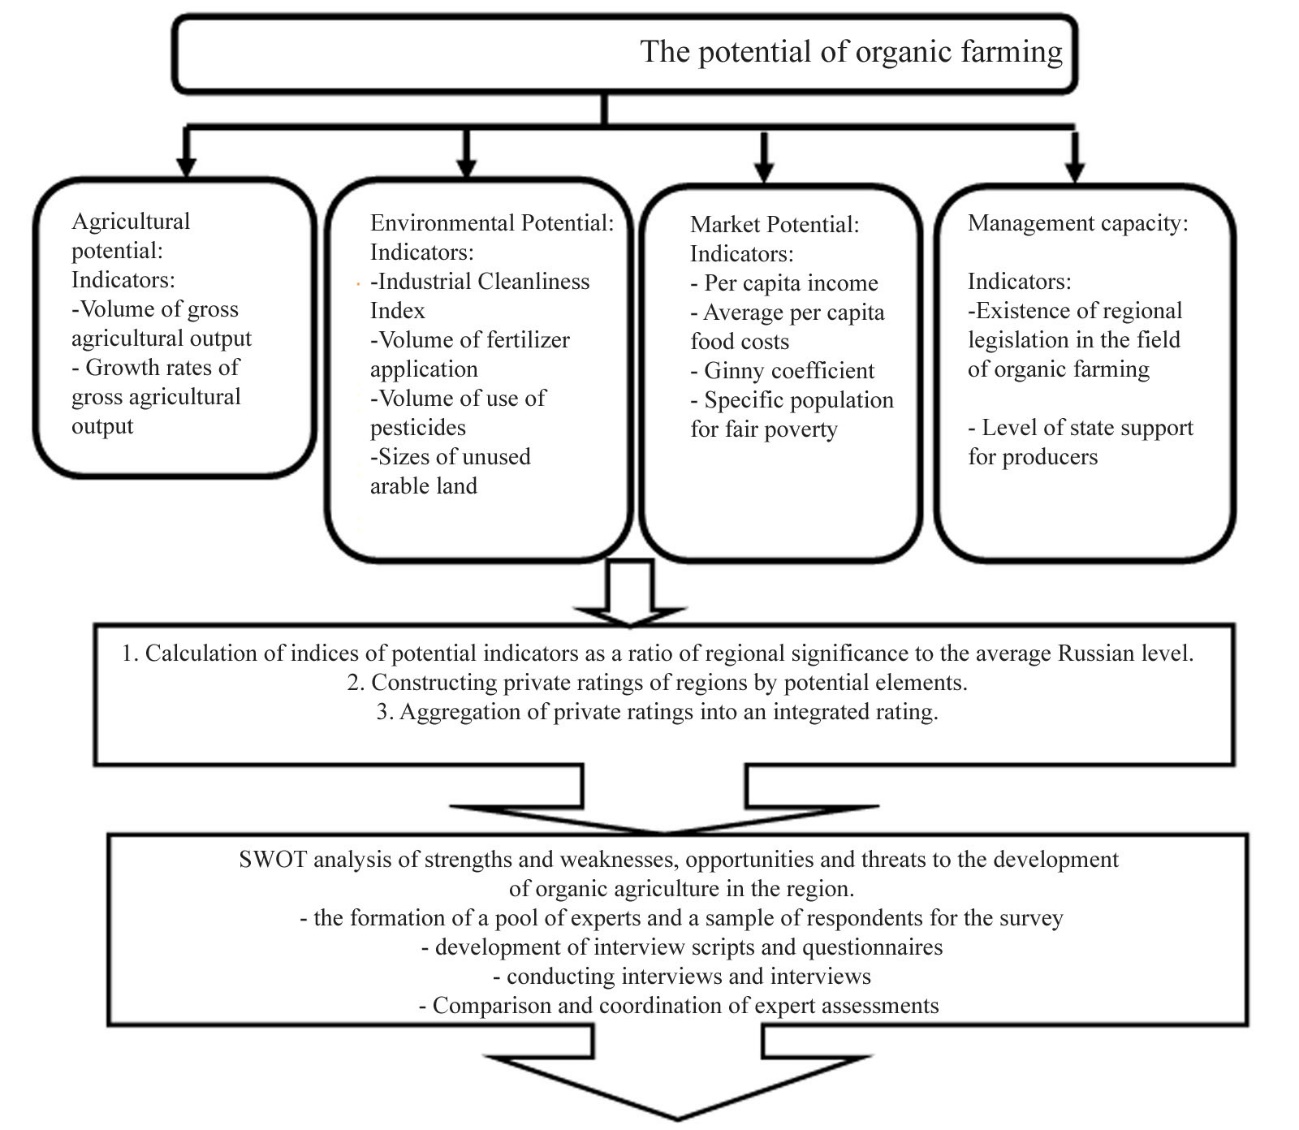 A methodological approach to assessing the potential and competitive advantages of organic farming in the region